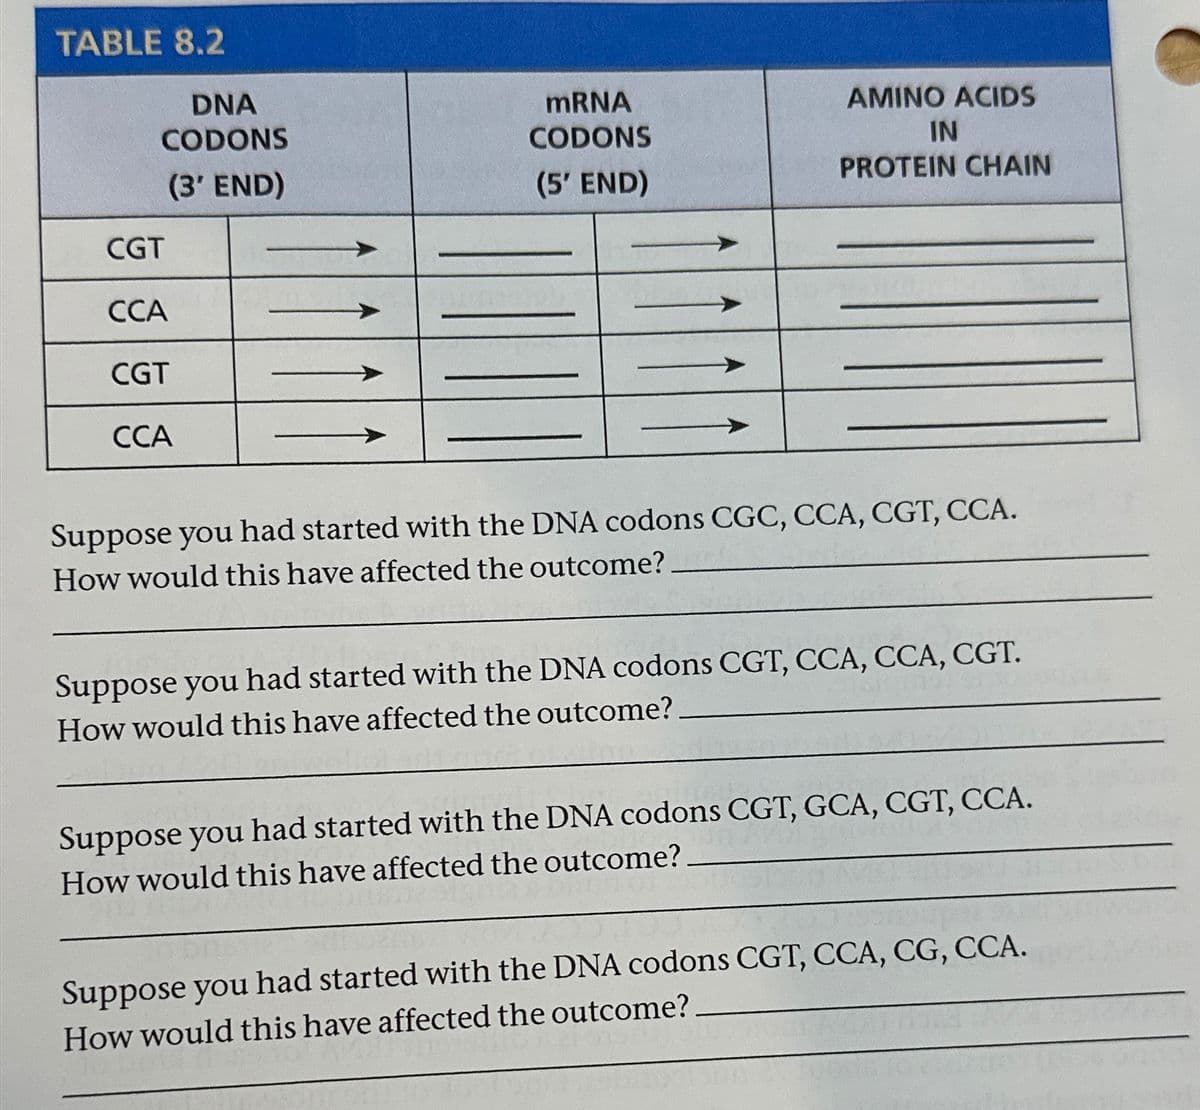 TABLE 8.2
DNA
CODONS
(3' END)
CGT
CCA
CGT
CCA
mRNA
CODONS
(5' END)
AMINO ACIDS
IN
PROTEIN CHAIN
Suppose you had started with the DNA codons CGC, CCA, CGT, CCA.
How would this have affected the outcome?
Suppose you had started with the DNA codons CGT, CCA, CCA, CGT.
How would this have affected the outcome?
Suppose you had started with the DNA codons CGT, GCA, CGT, CCA.
How would this have affected the outcome?
Suppose you had started with the DNA codons CGT, CCA, CG, CCA.
How would this have affected the outcome?